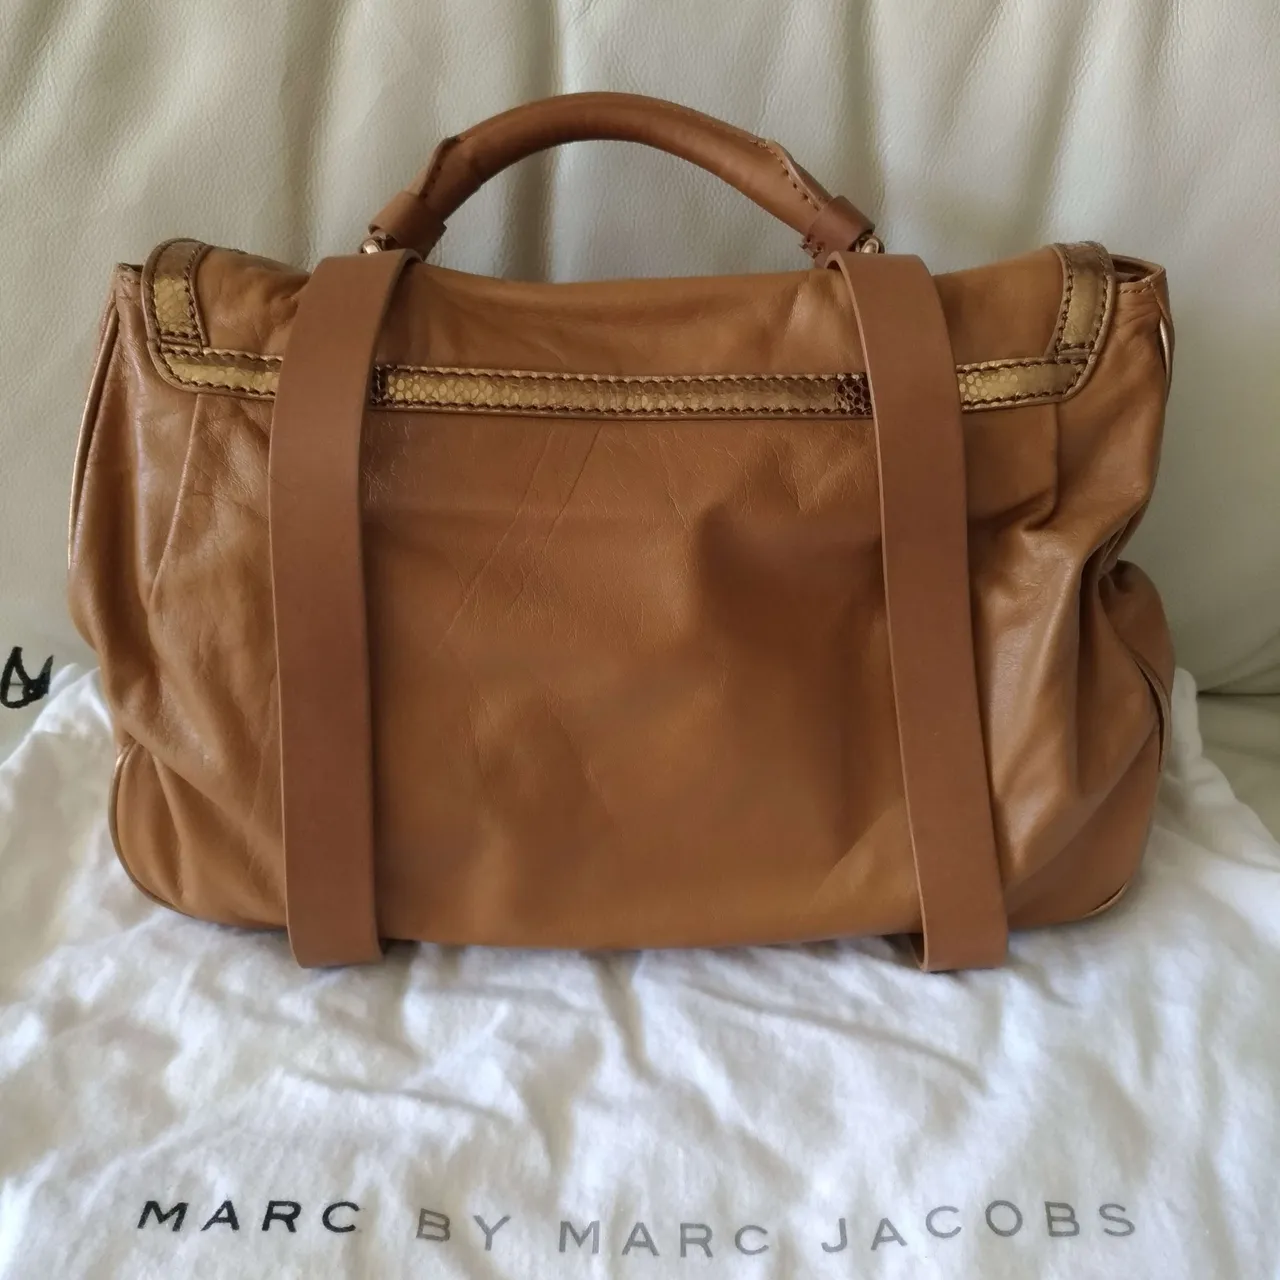 MARC By MARC JACOBS Leather Satchel photo 4